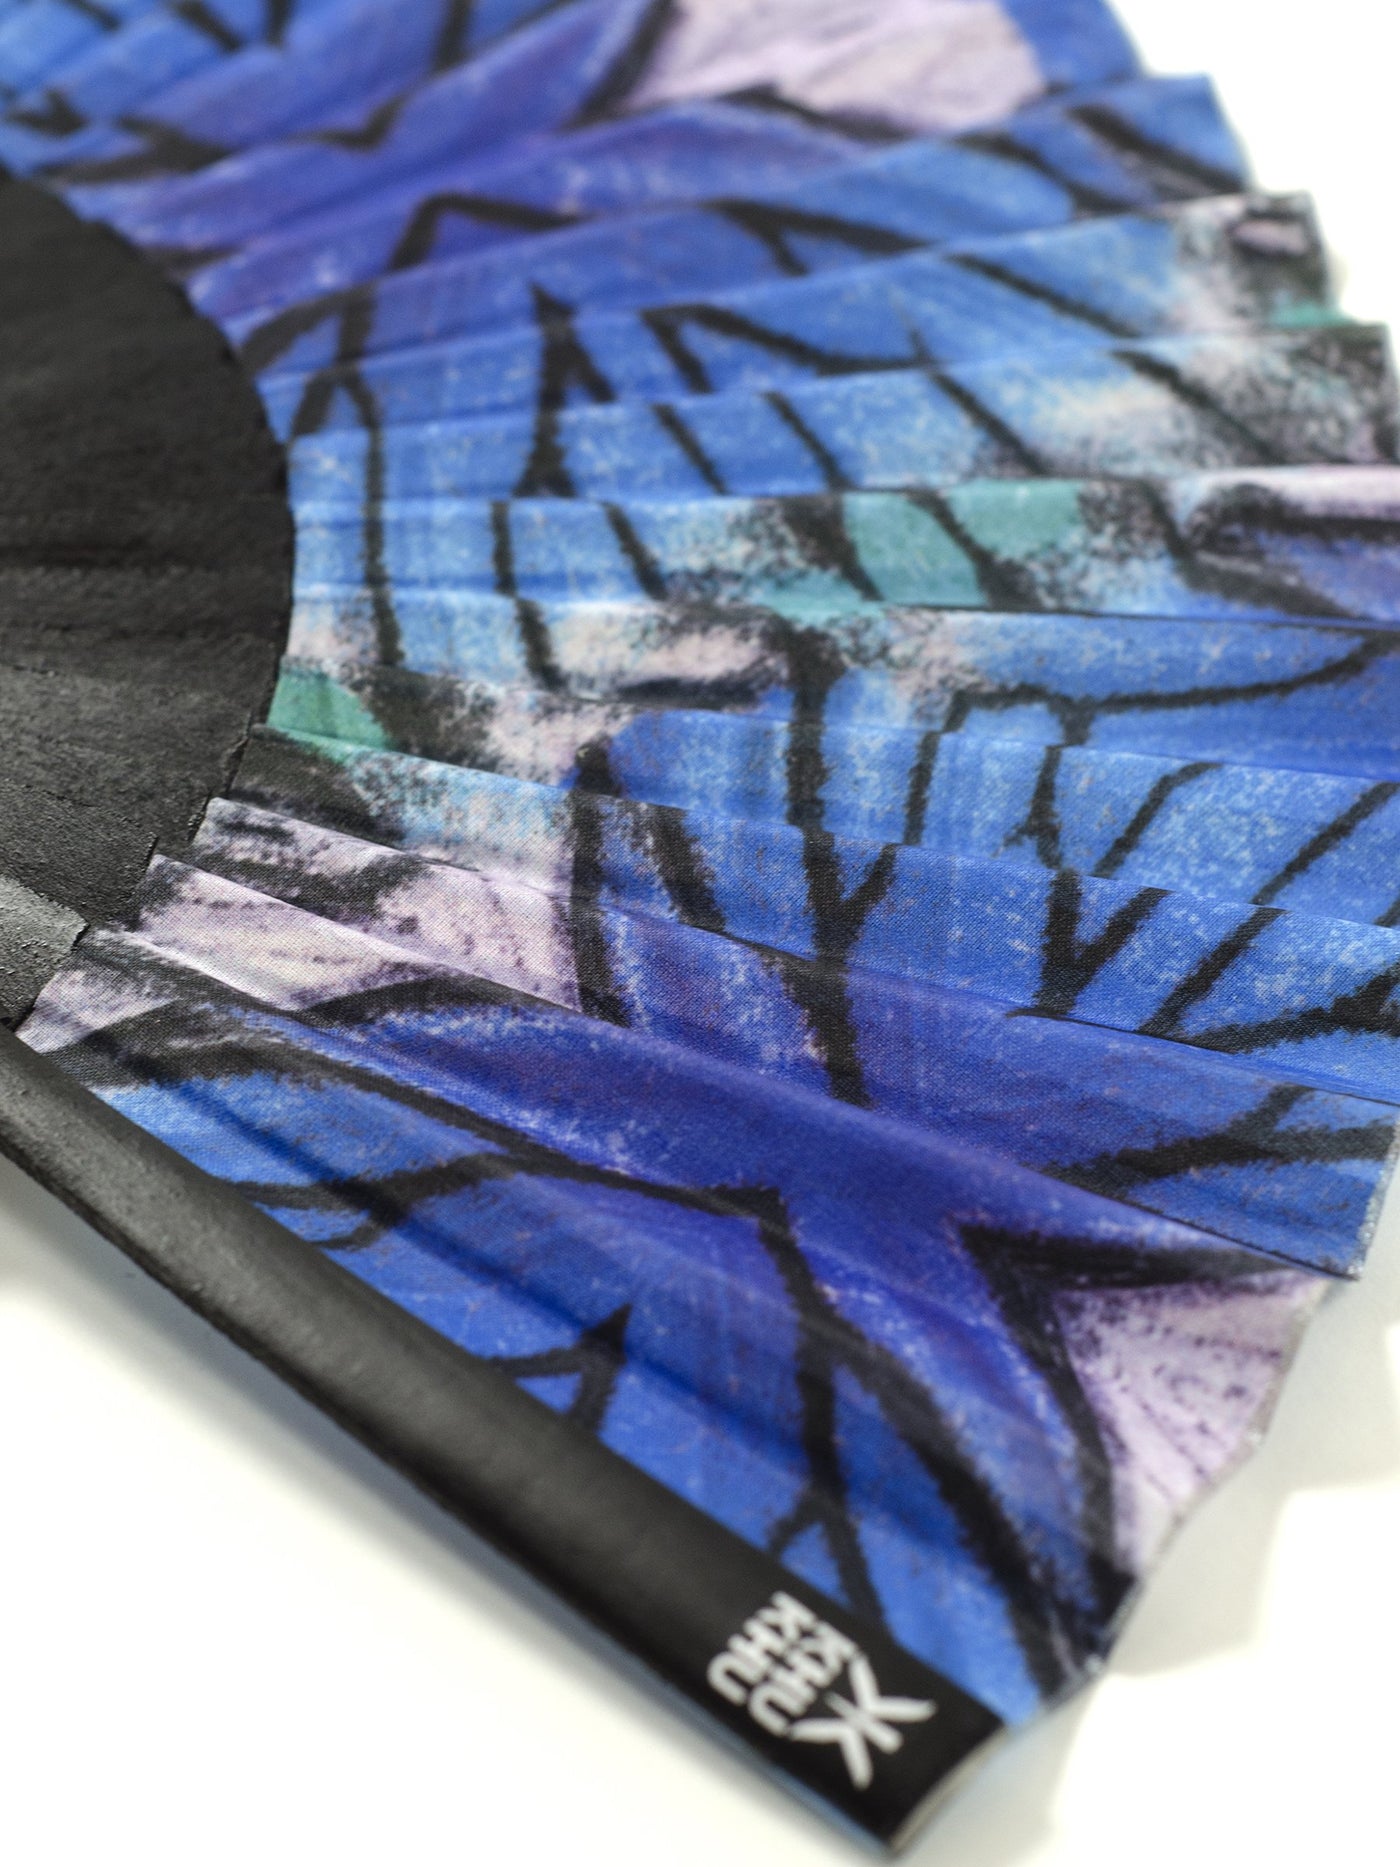 Close up of Blue Lyca butterfly print hand-fan from Khu Khu. Symmetrical geometric close up of real butterfly wing for print. Black sticks and silver detailing. 